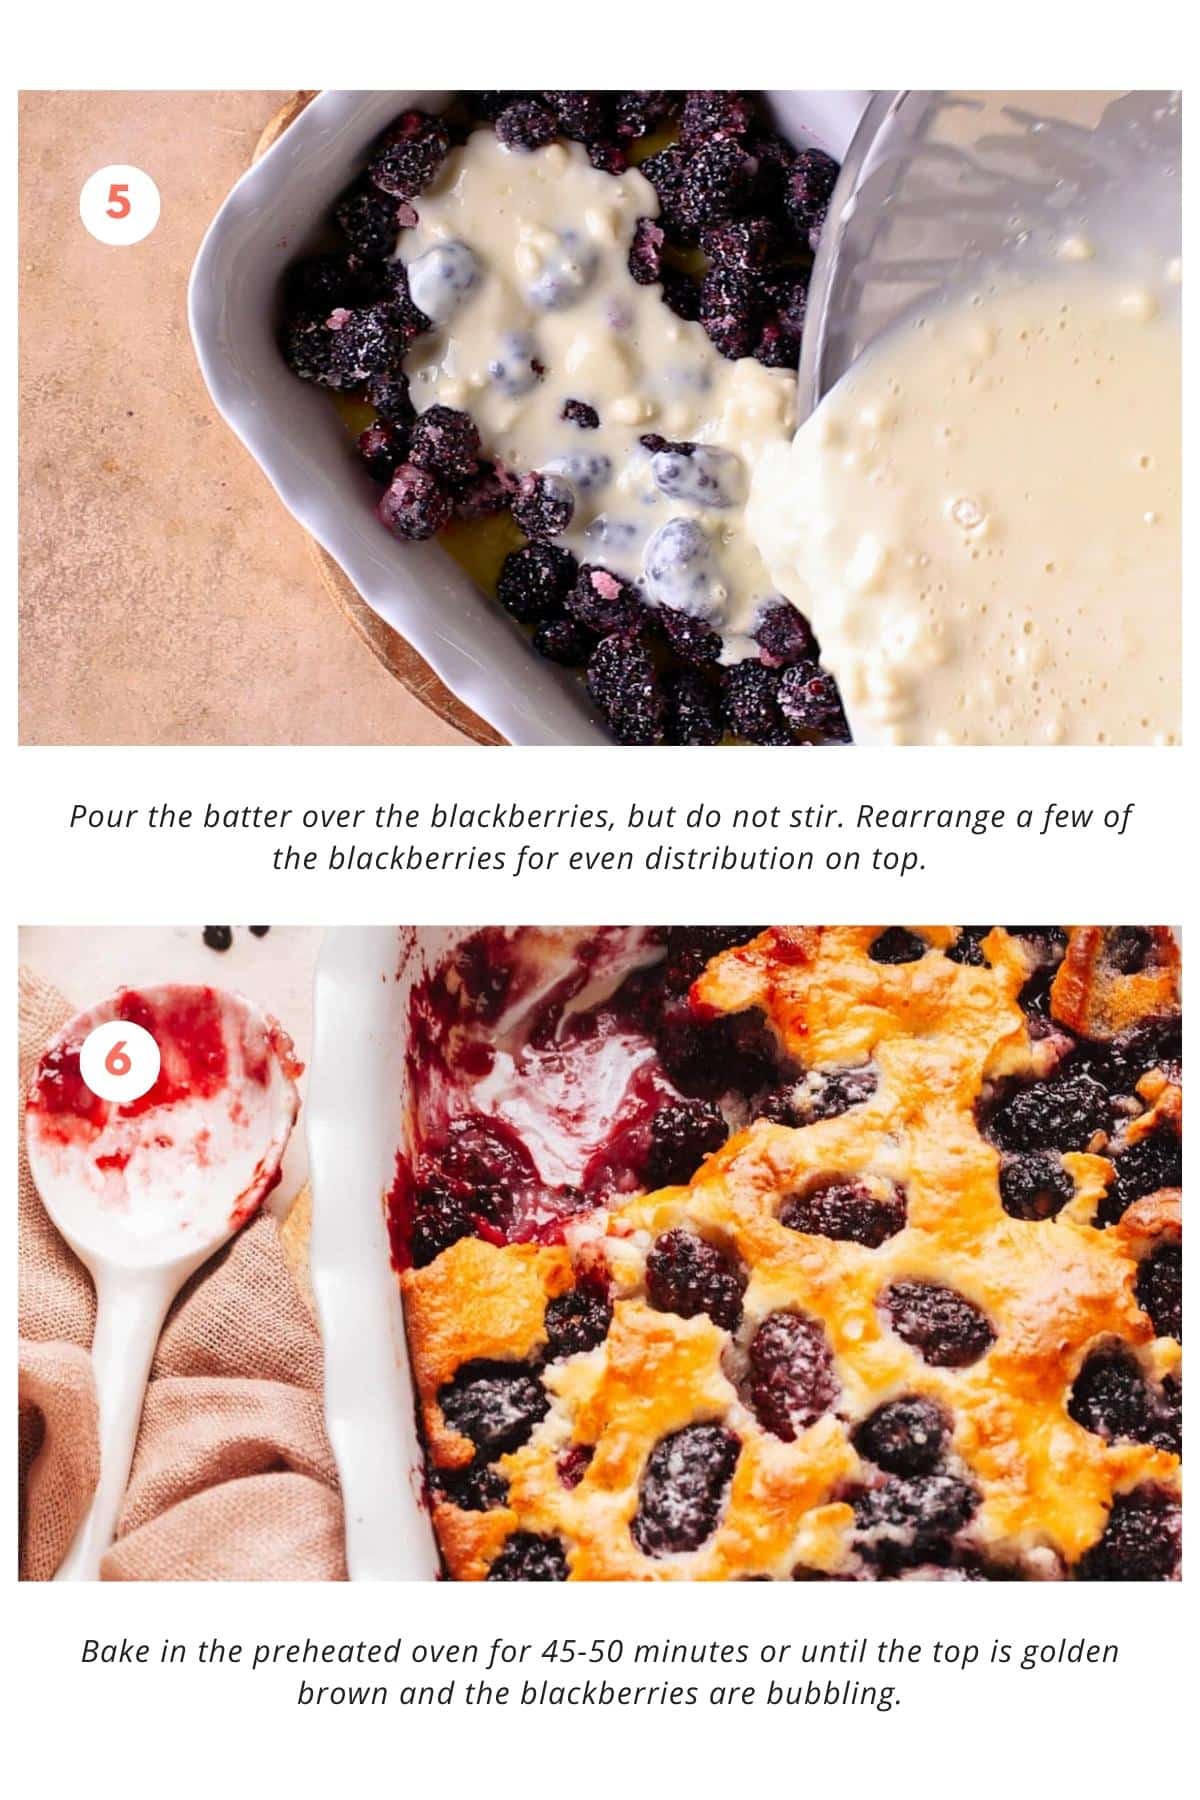 The batter is poured over the blackberries without stirring. A few of the blackberries are rearranged for even distribution on top. The cobbler is then baked in the preheated oven for 45-50 minutes or until the top turns golden brown and the blackberries are bubbling.